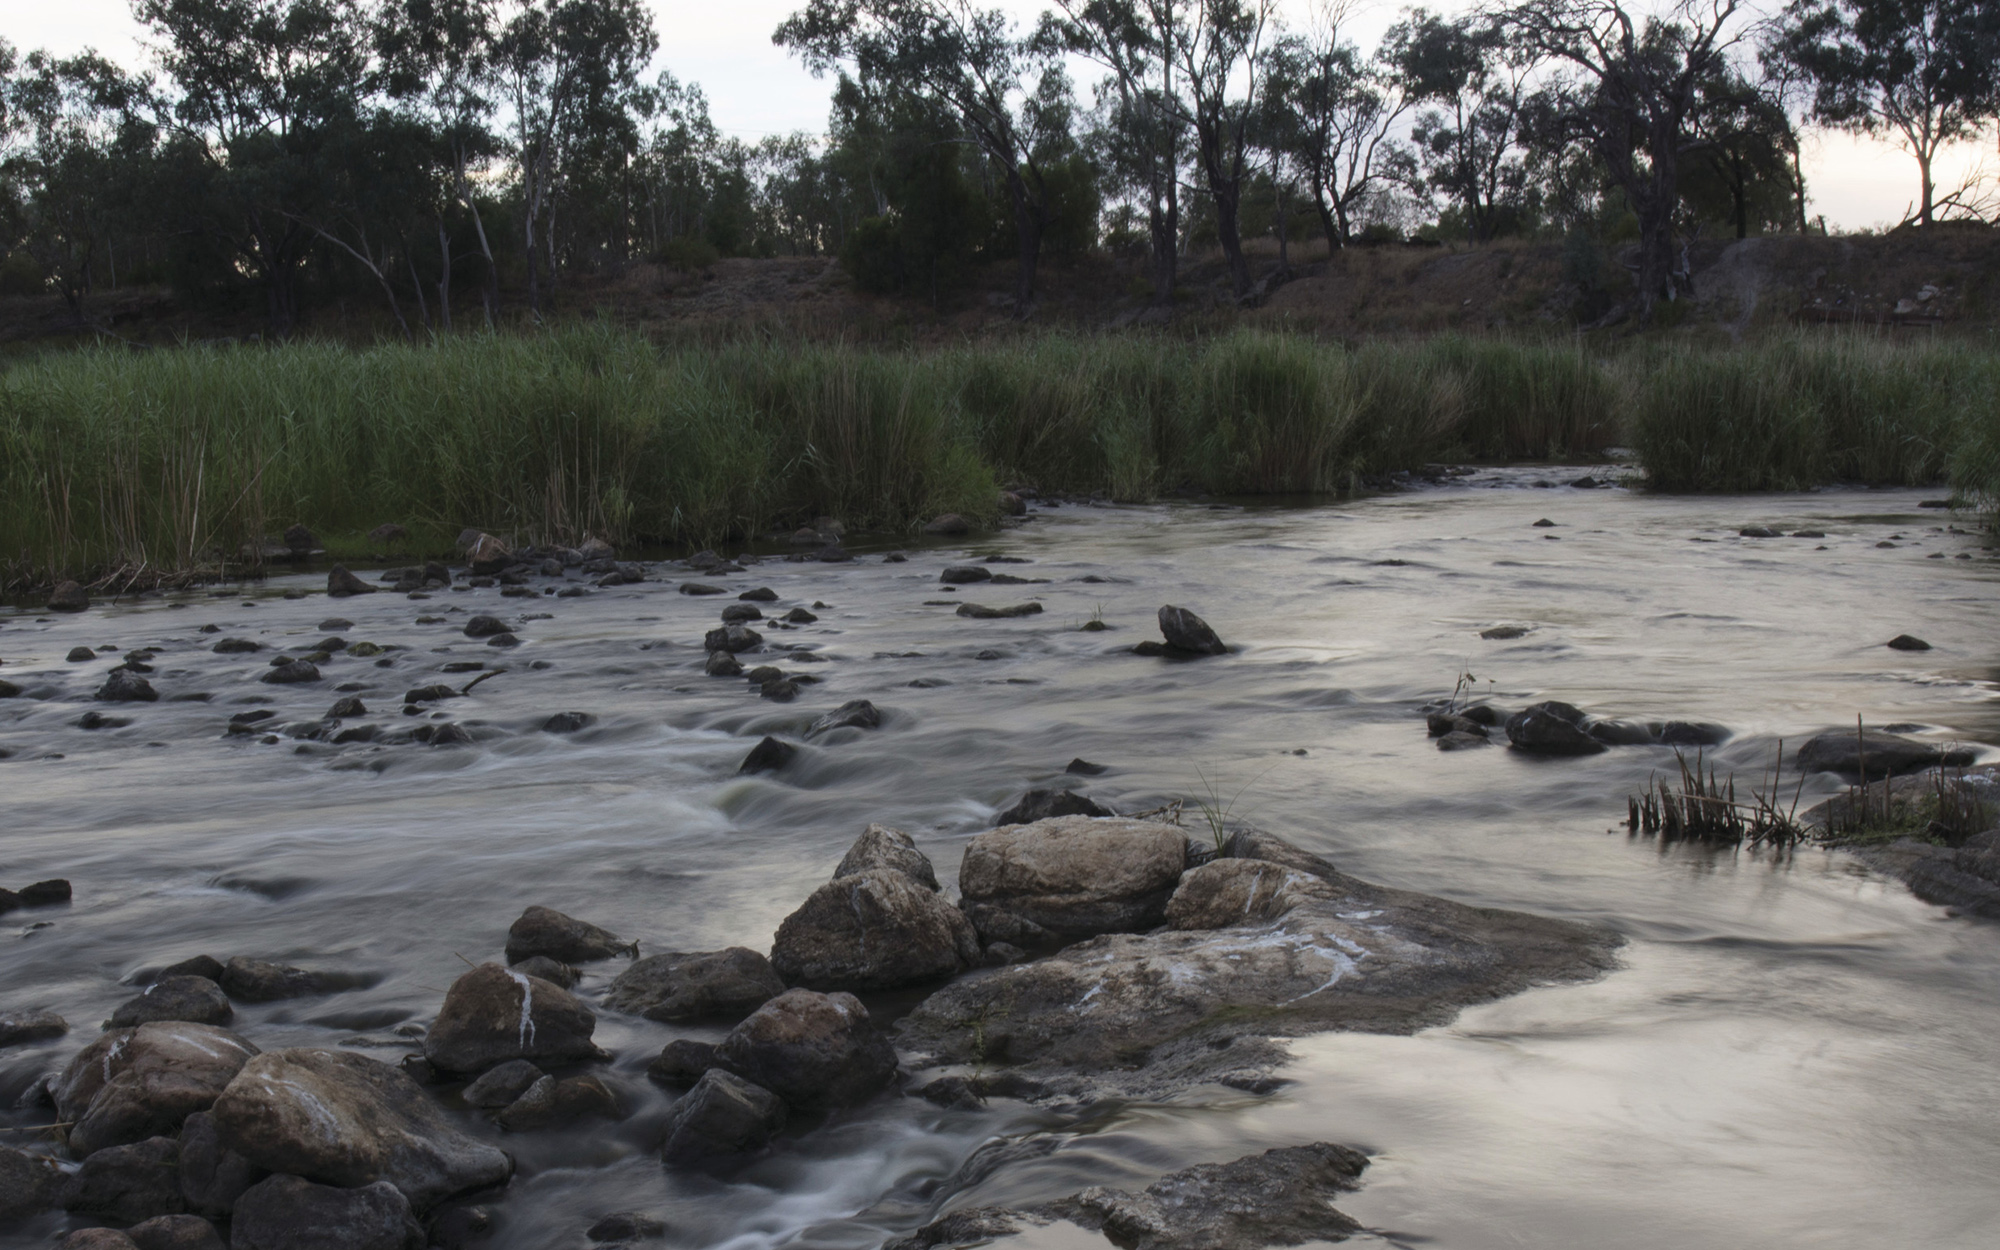 Heritage-protected indigenous fish traps on the Barwon River. Brewarrina, NSW.